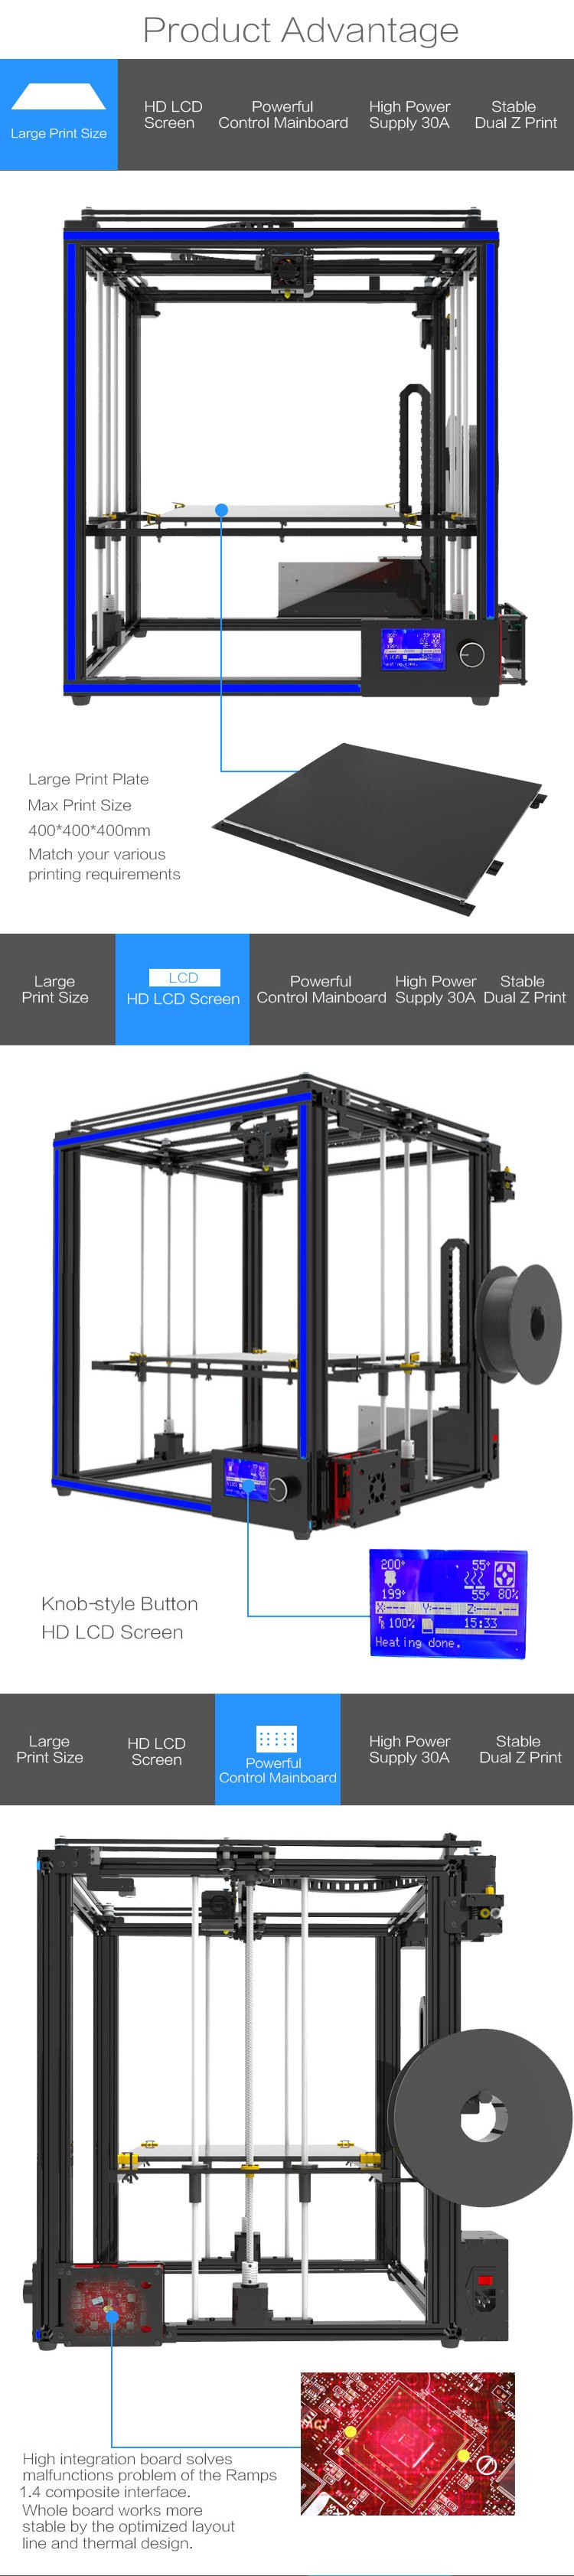 TRONXY® X5S-400 DIY Aluminum 3D Printer Kit 400*400*400mm Large Printing Size With Dual Z-axis Rod/HD LCD Screen/Double Fan 1.75mm 0.4mm Nozzle 11